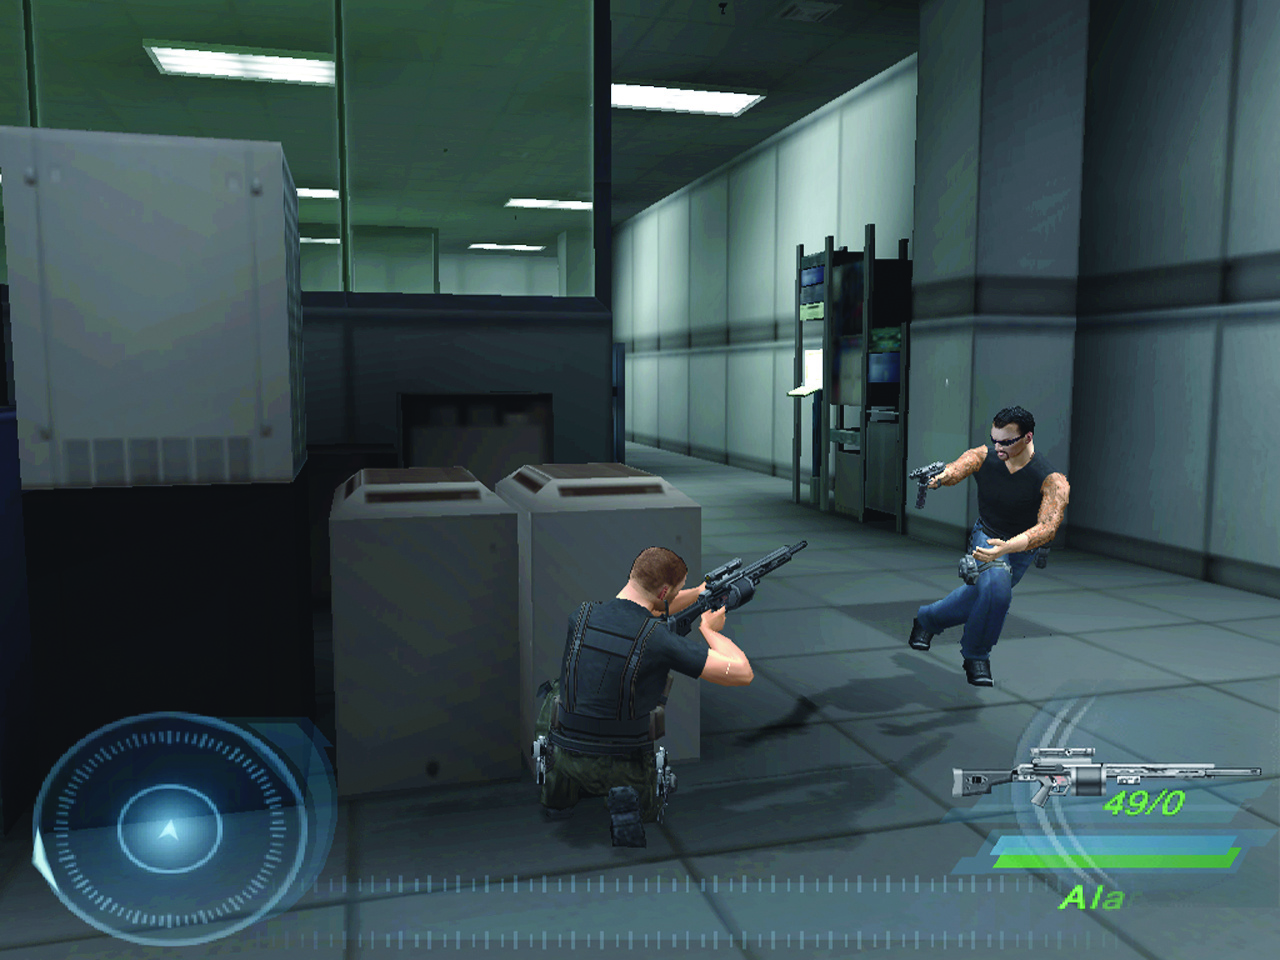 Syphon Filter: The Omega Strain Preview - GameSpot